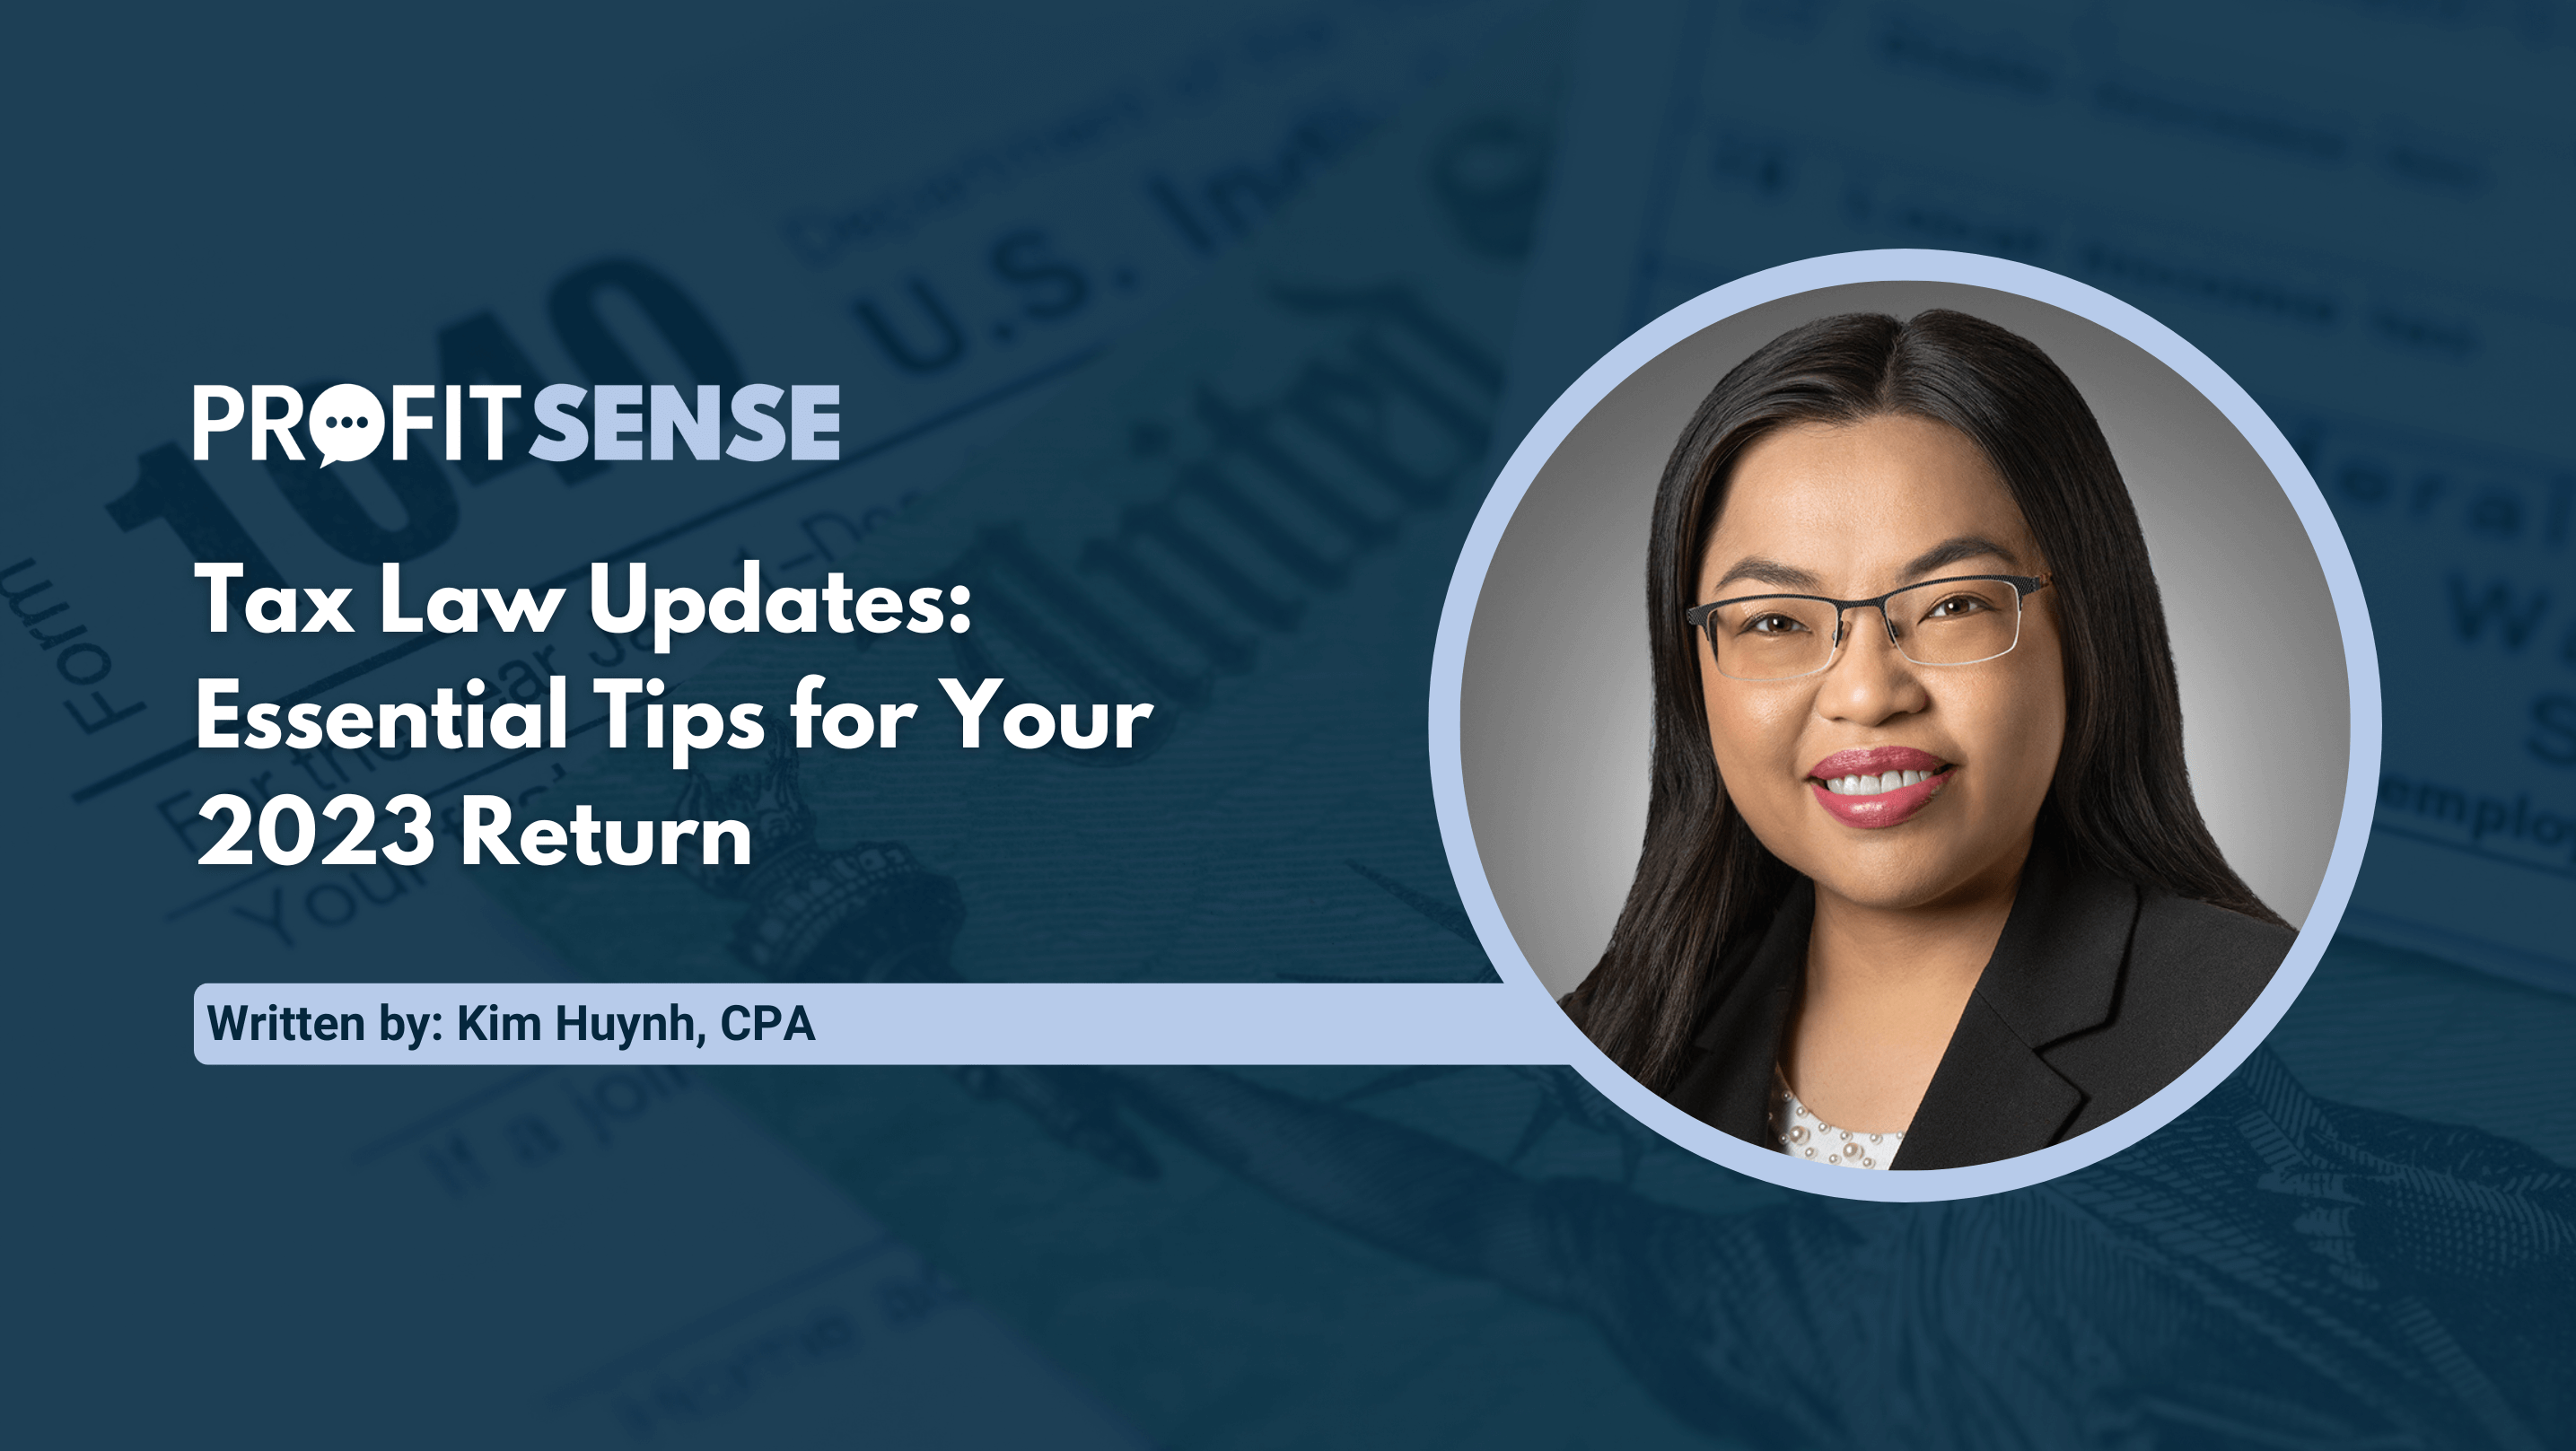 Tax Law Updates: Essential Tips for Your 2023 Return